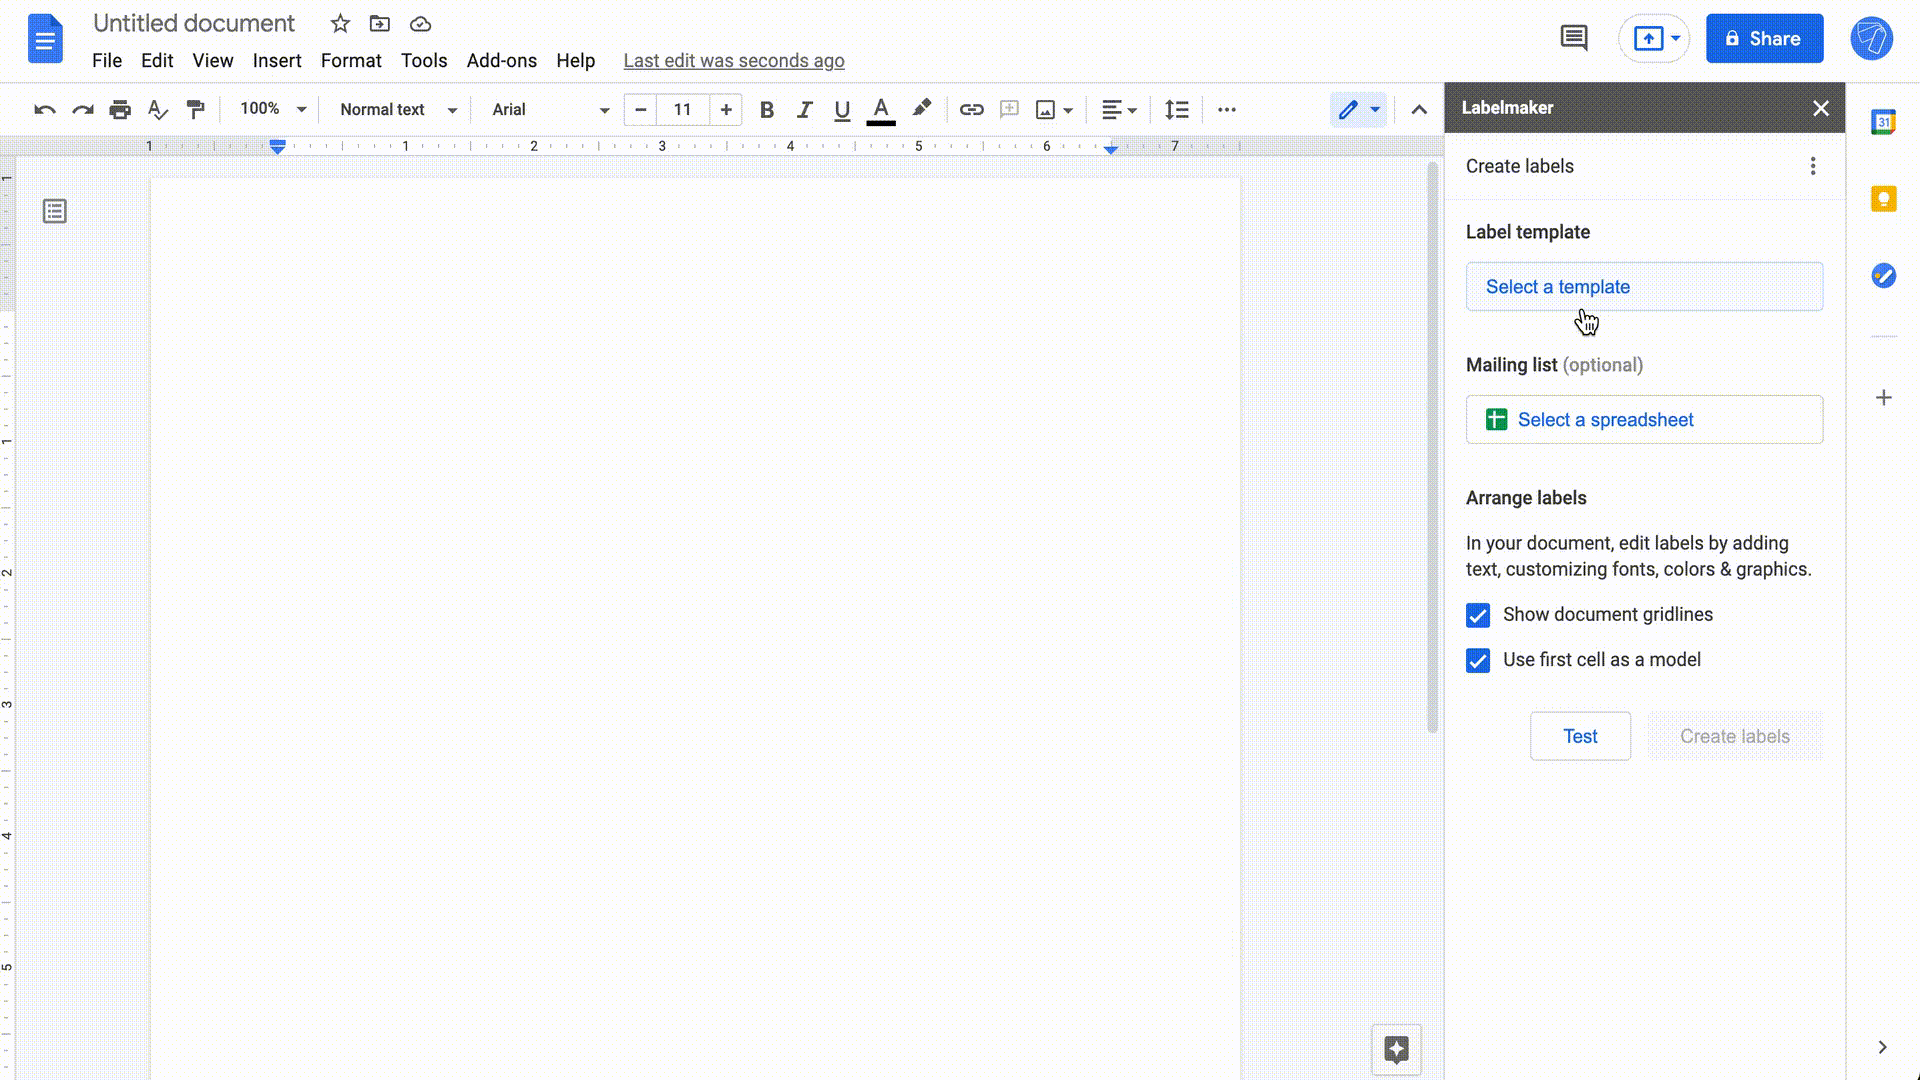 How to make labels in Google Docs?